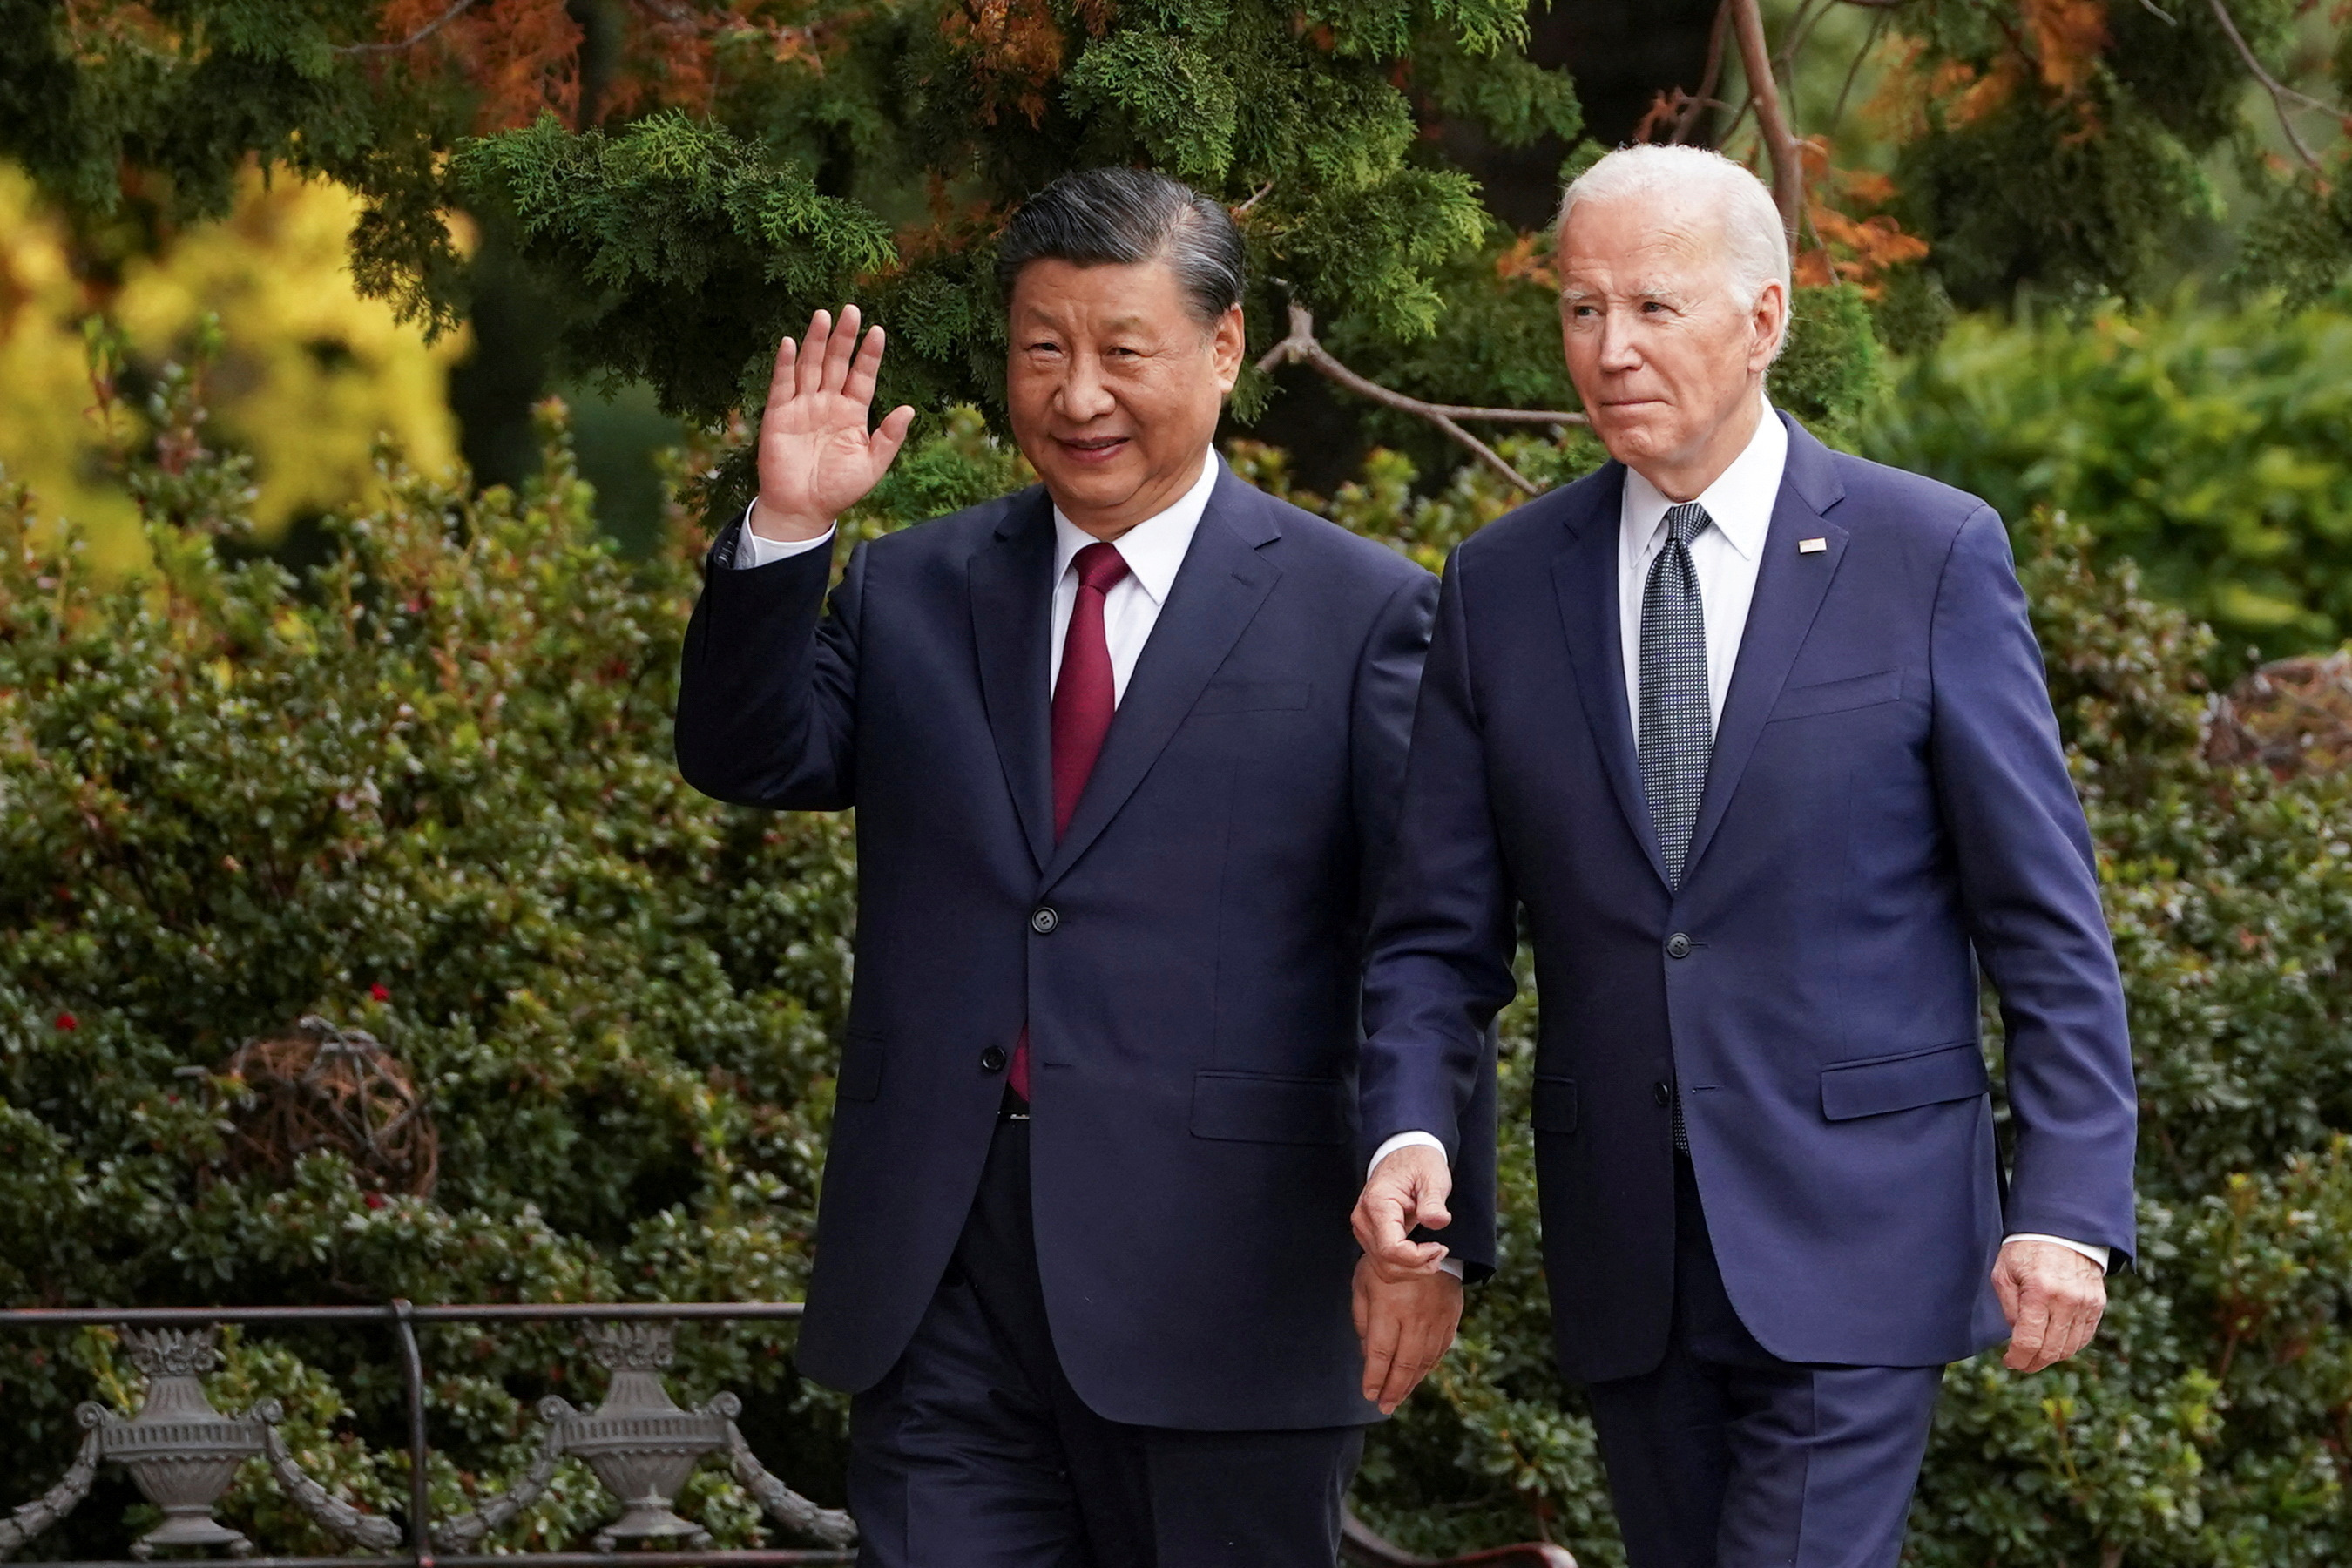 What China's Xi gained from his Biden meeting